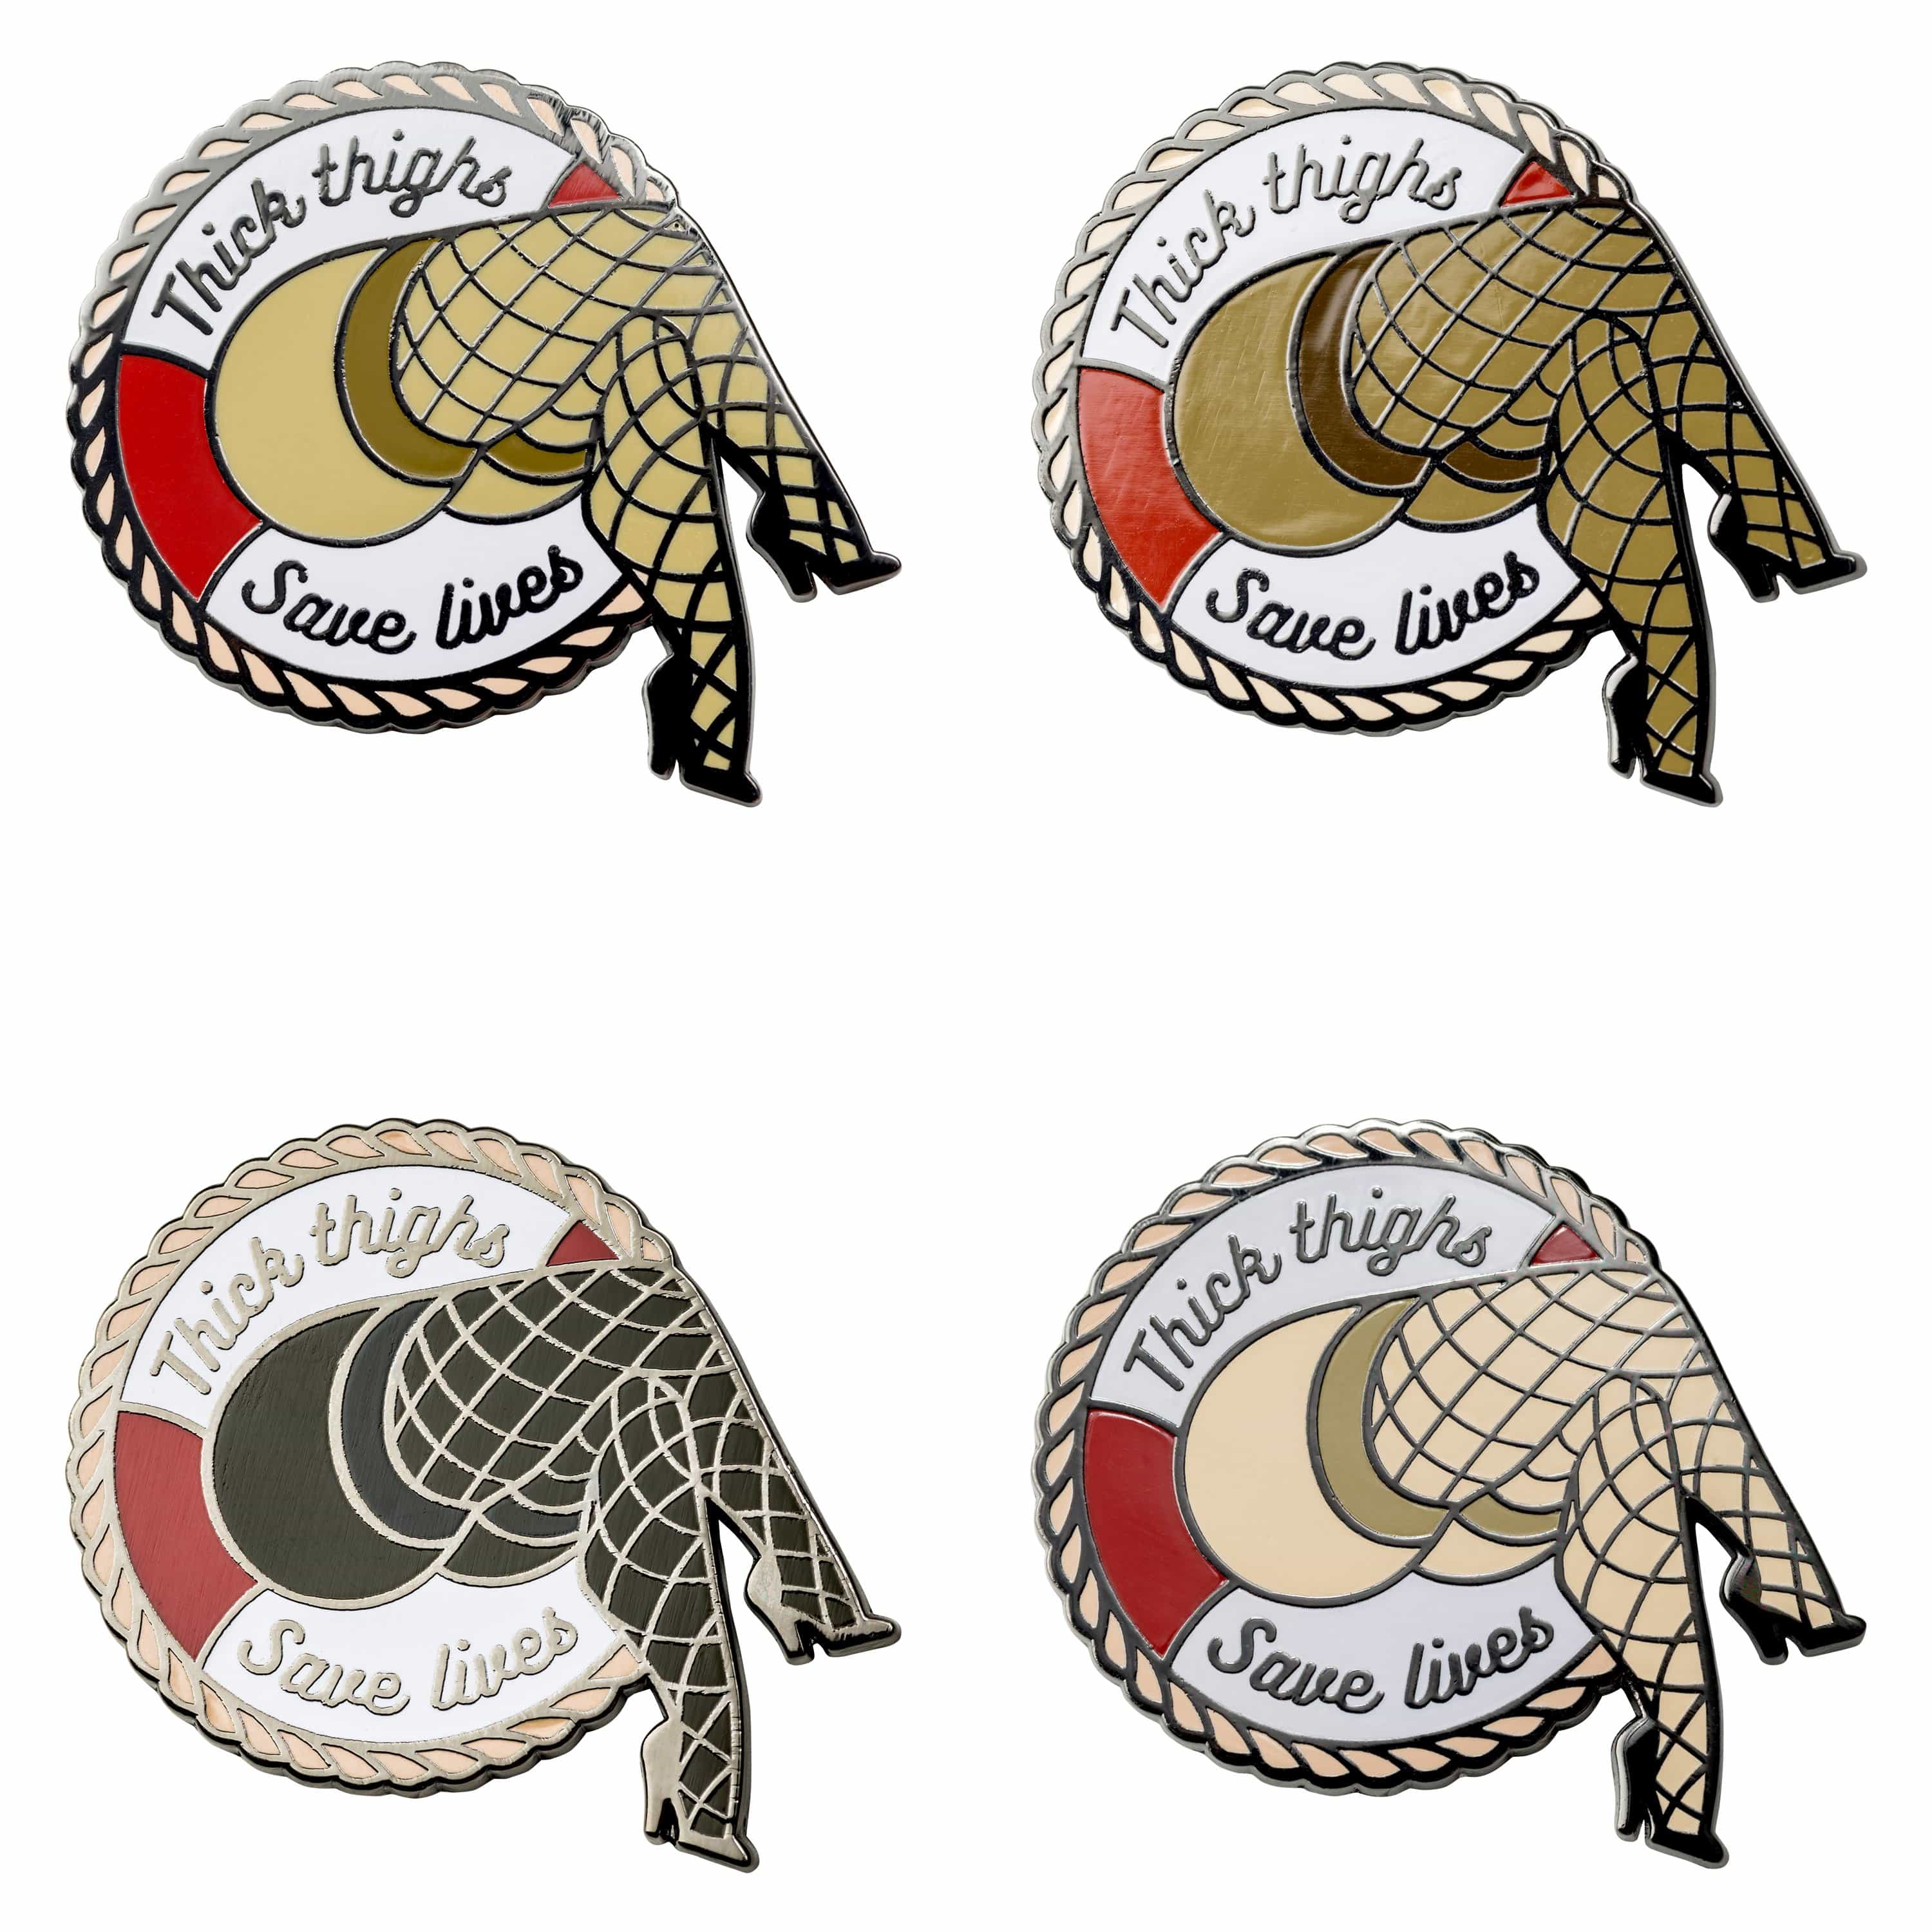 Sanshee - Thick Thighs Save Lives Silver Plated Enamel Pin All Four Pins